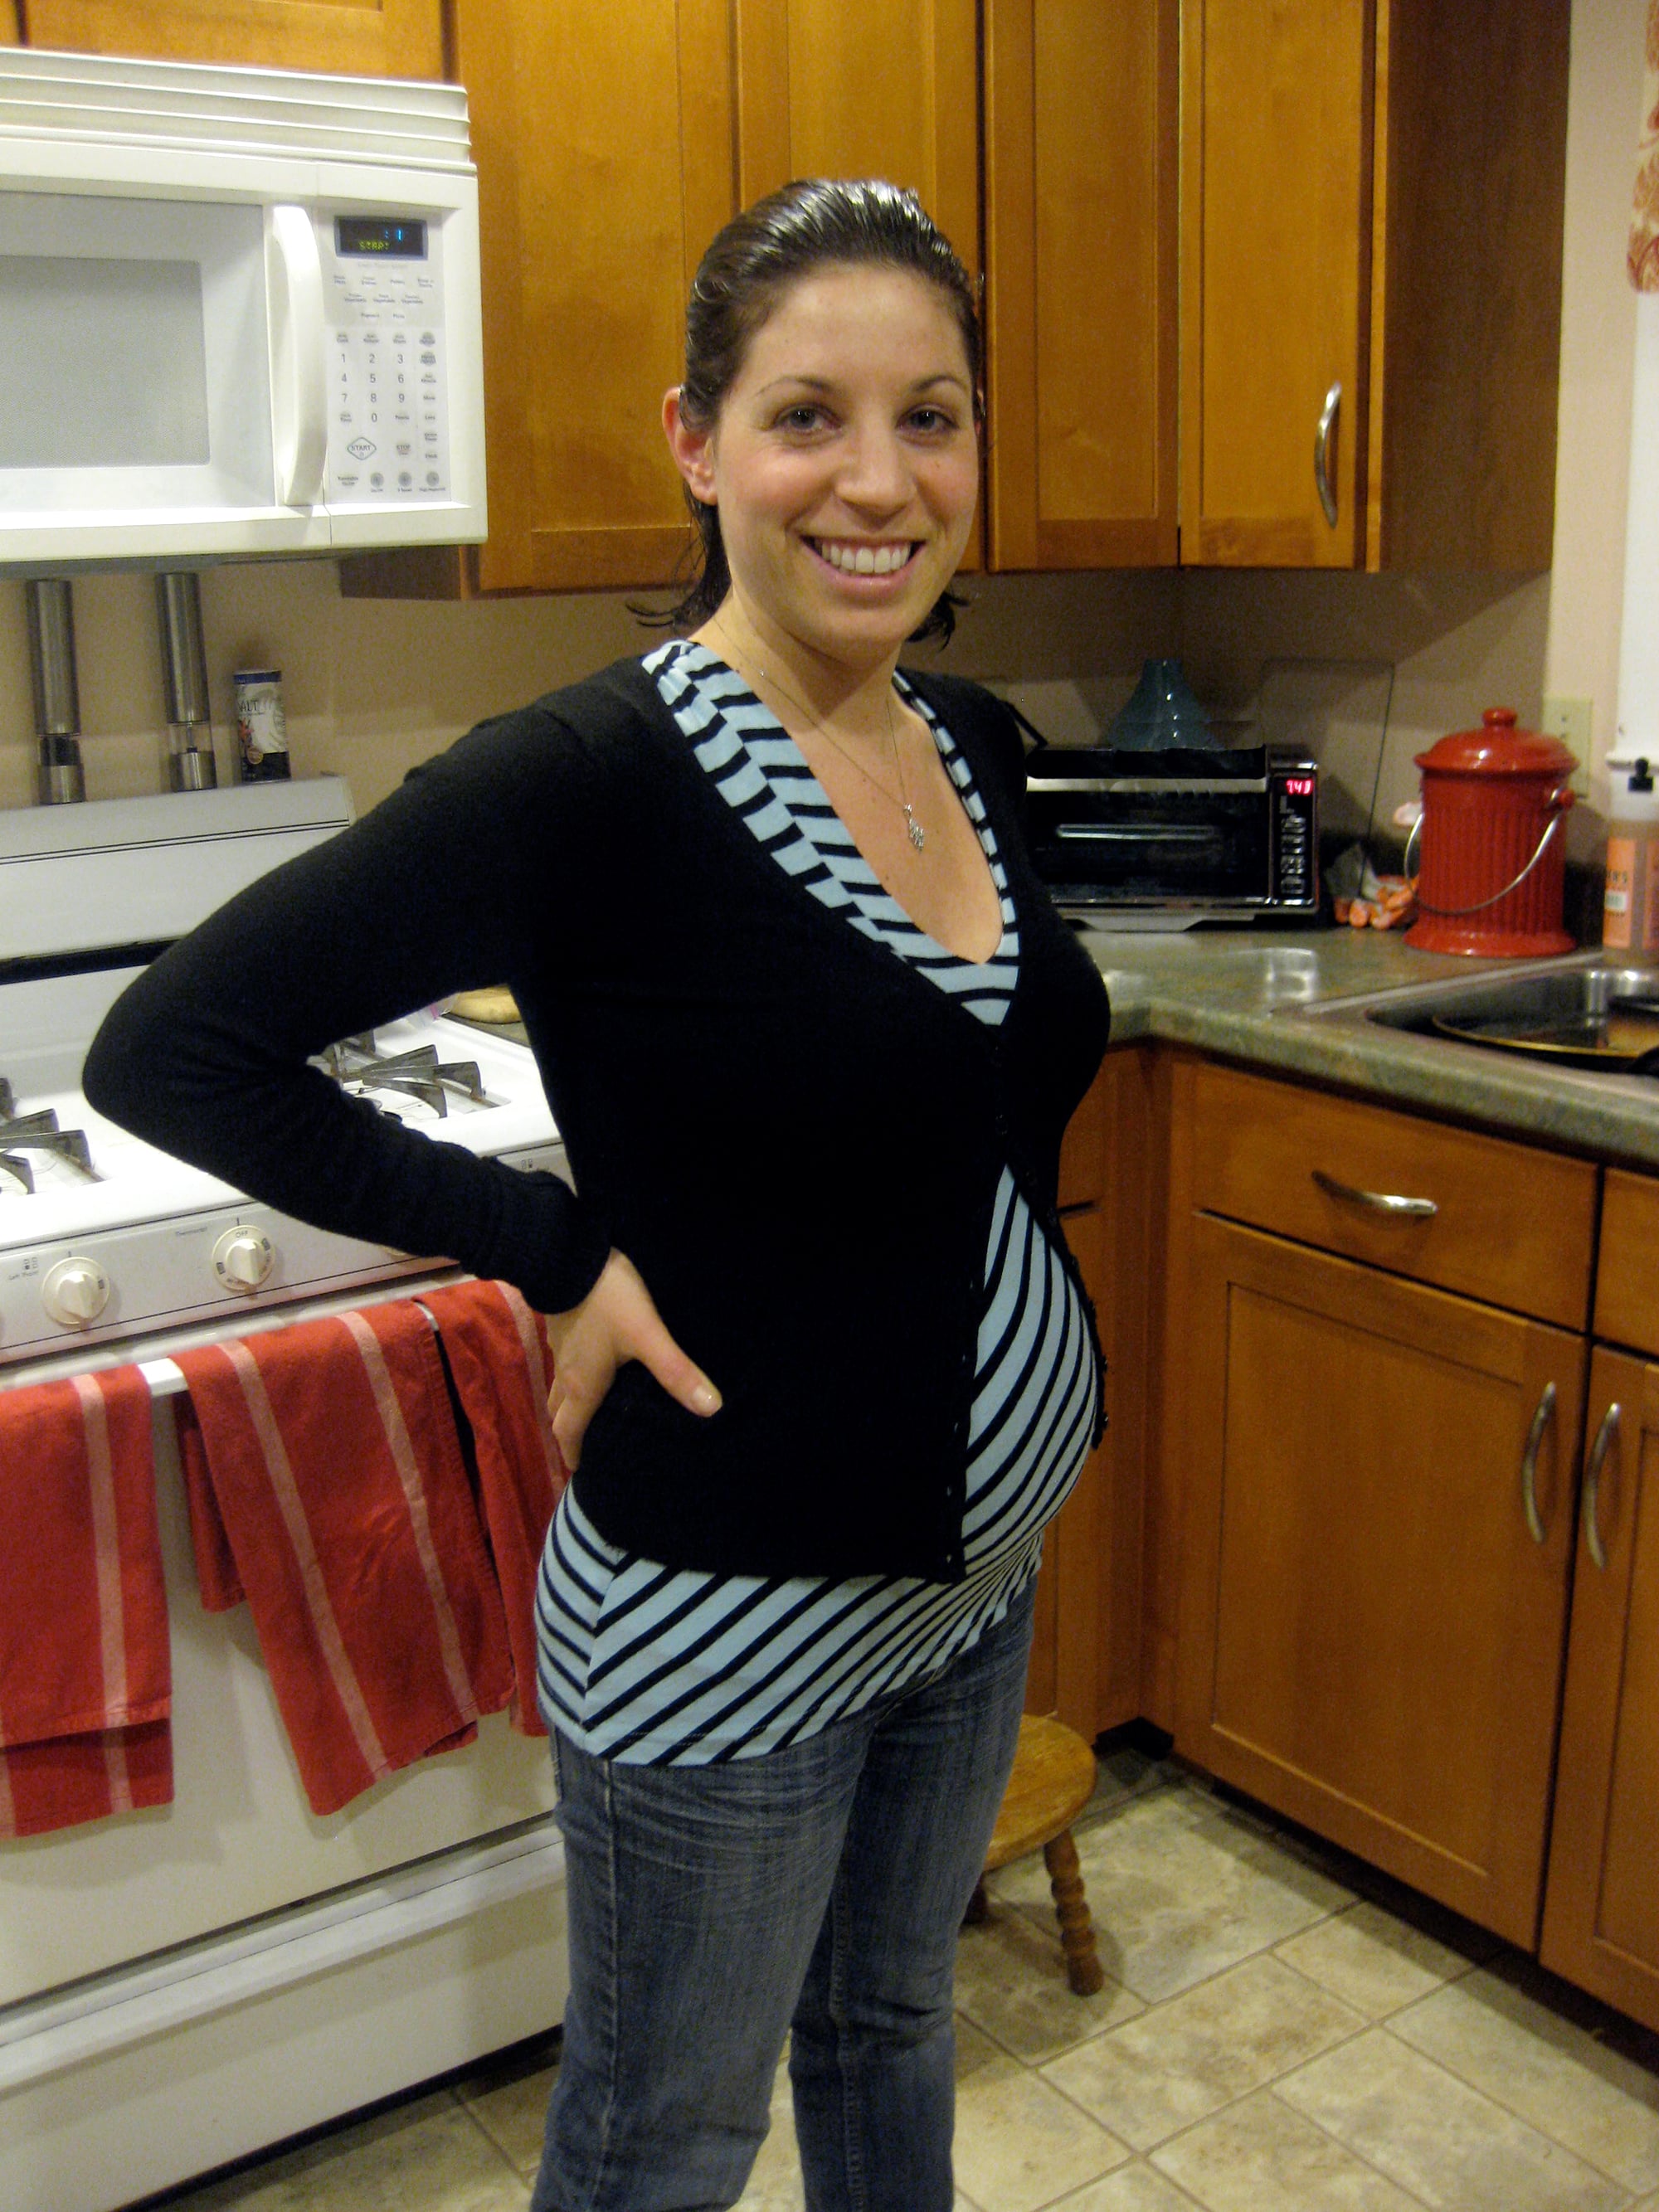 How to Deal With Gaining Weight While Pregnant | POPSUGAR ...